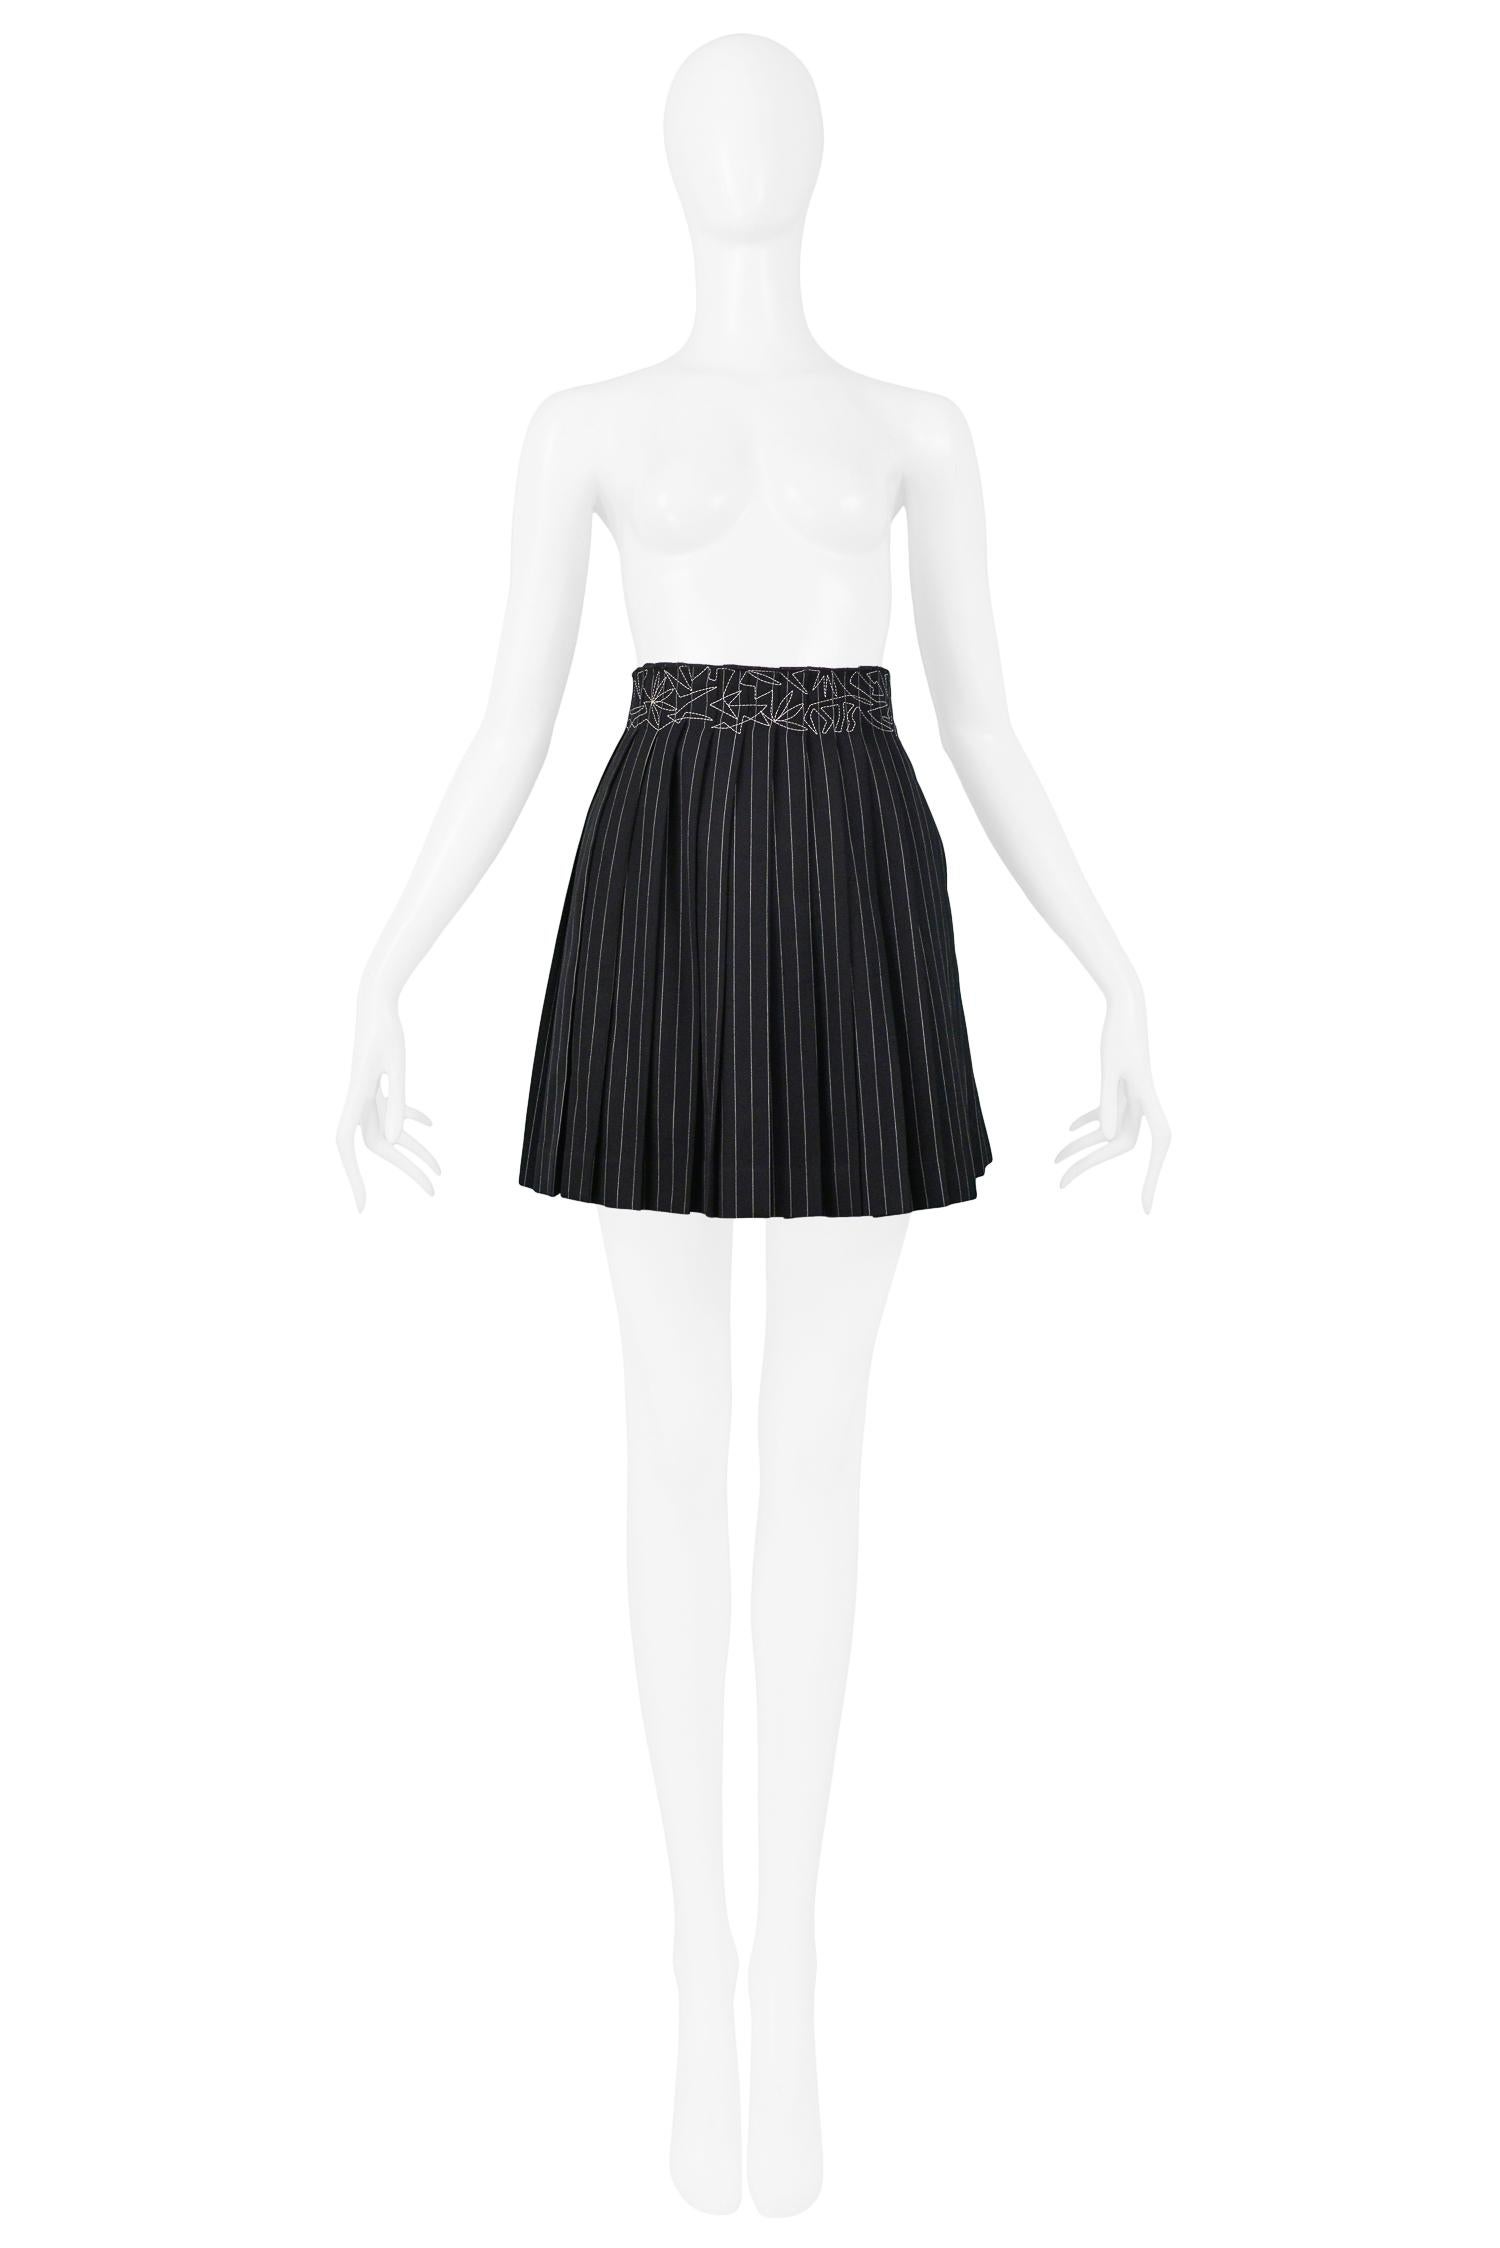 Vintage Jean Paul Gaultier black and white wool pinstripe pleated mini skirt with white abstract patterned embroidery at waist.

Excellent Vintage Condition.

Size 40